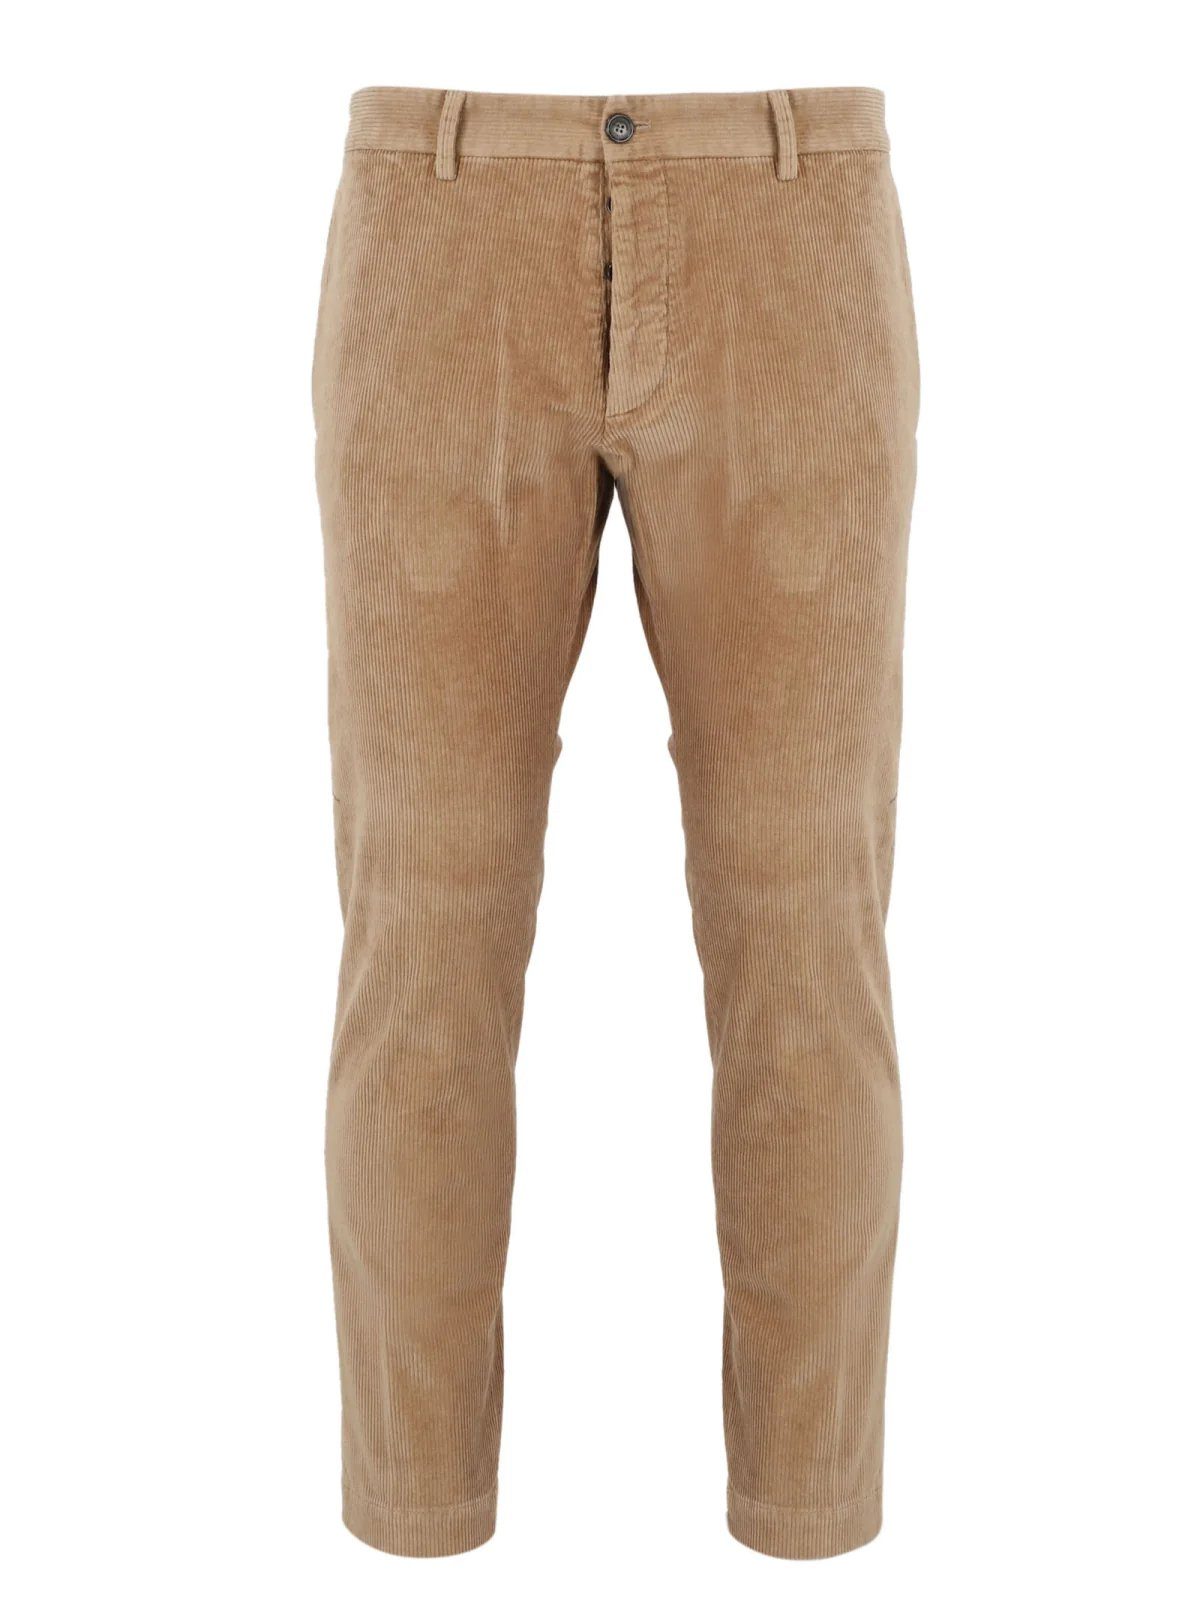 GUY Dsquared2 TRS Cordhose COOL